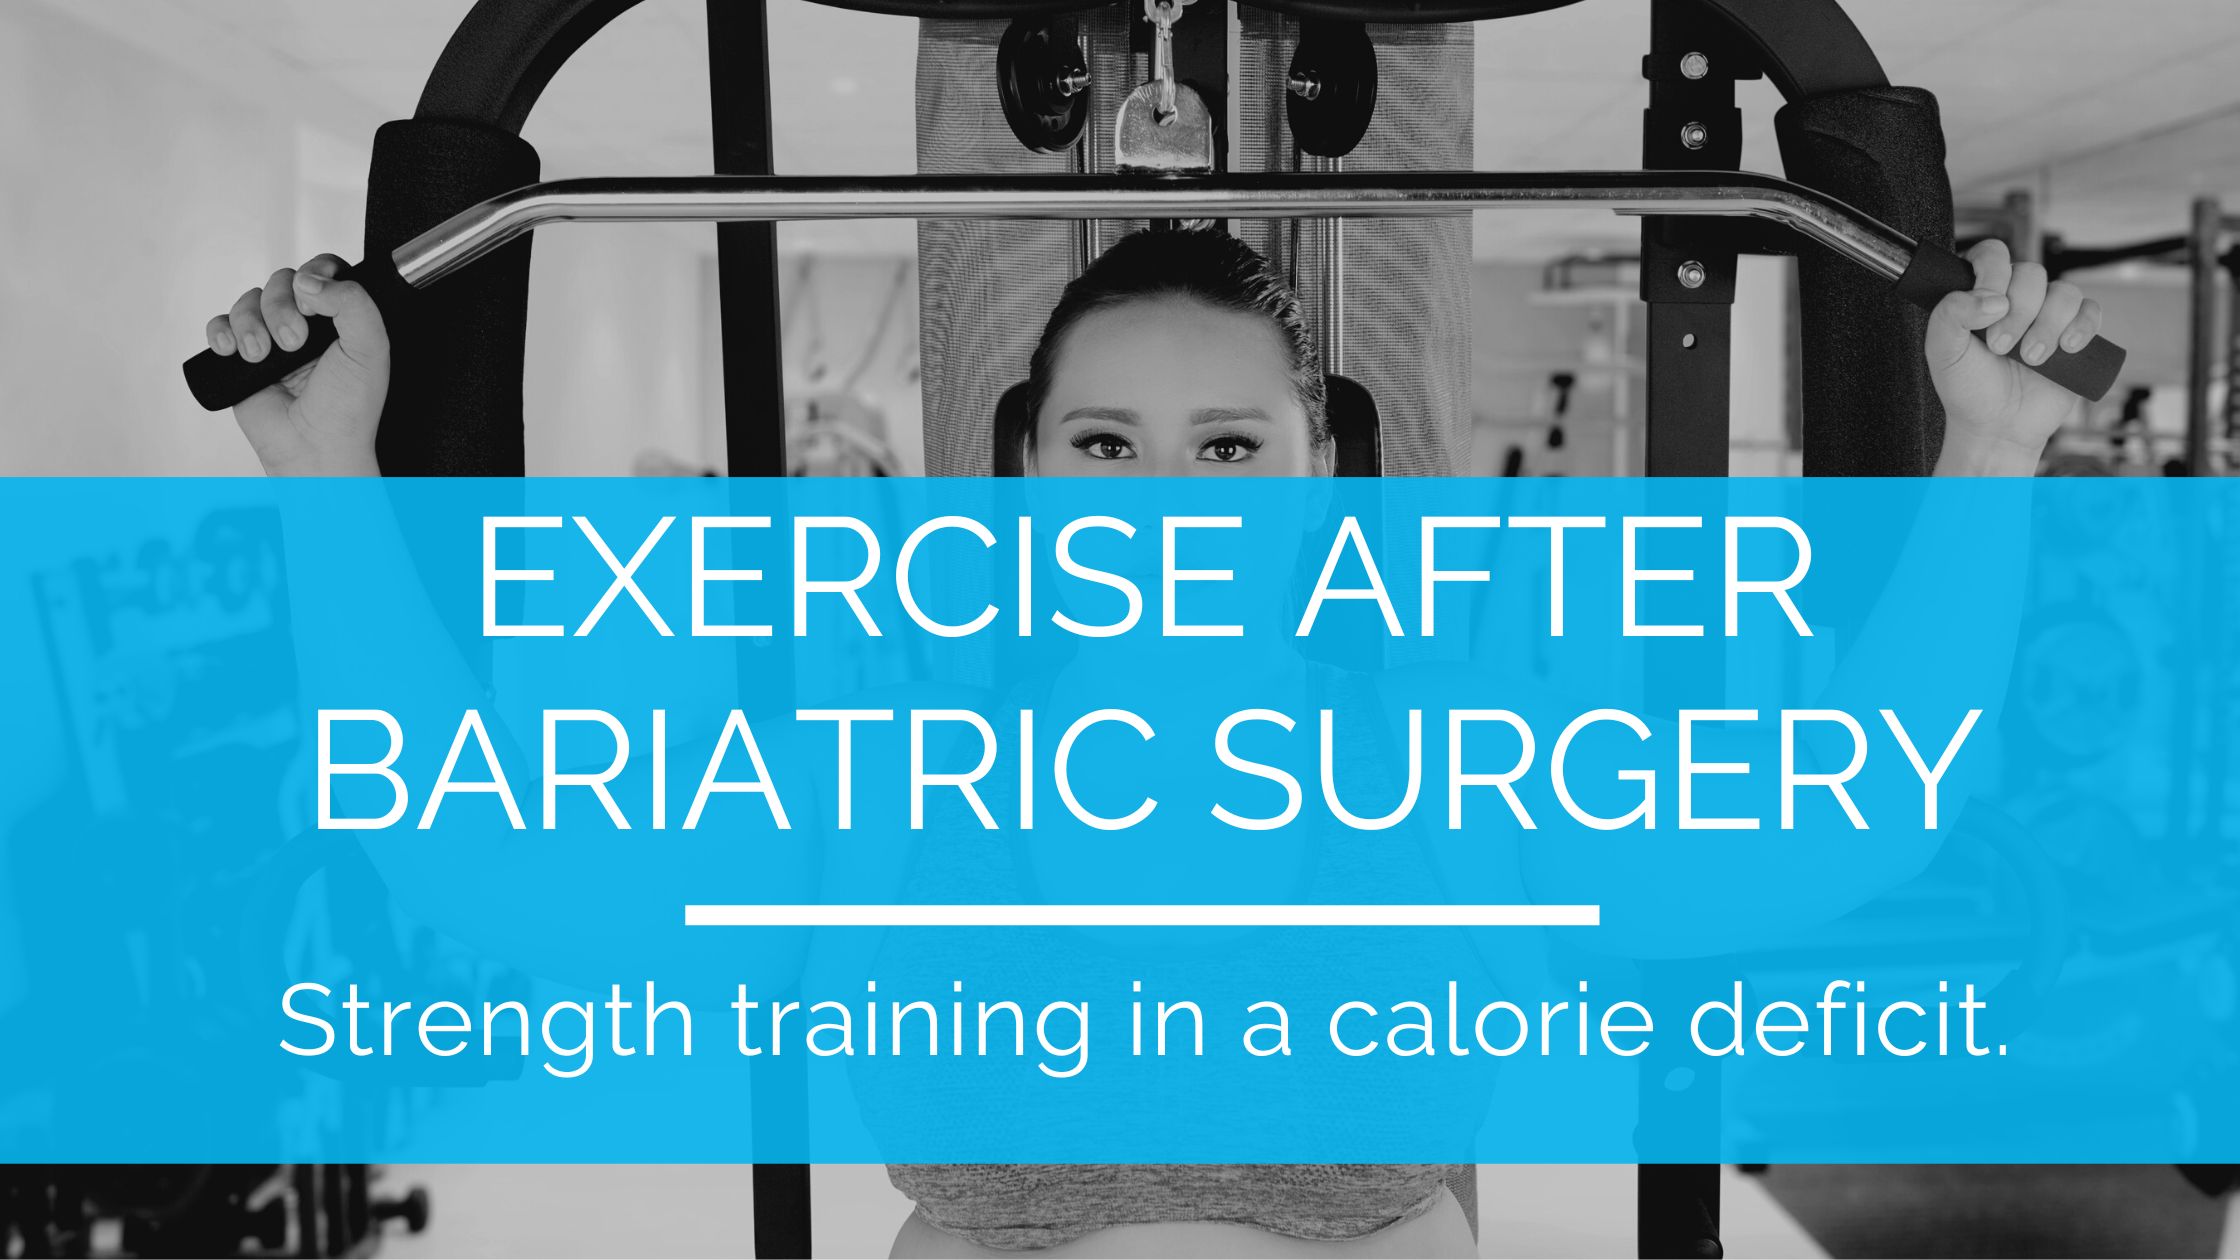 Exercise after bariatric surgery